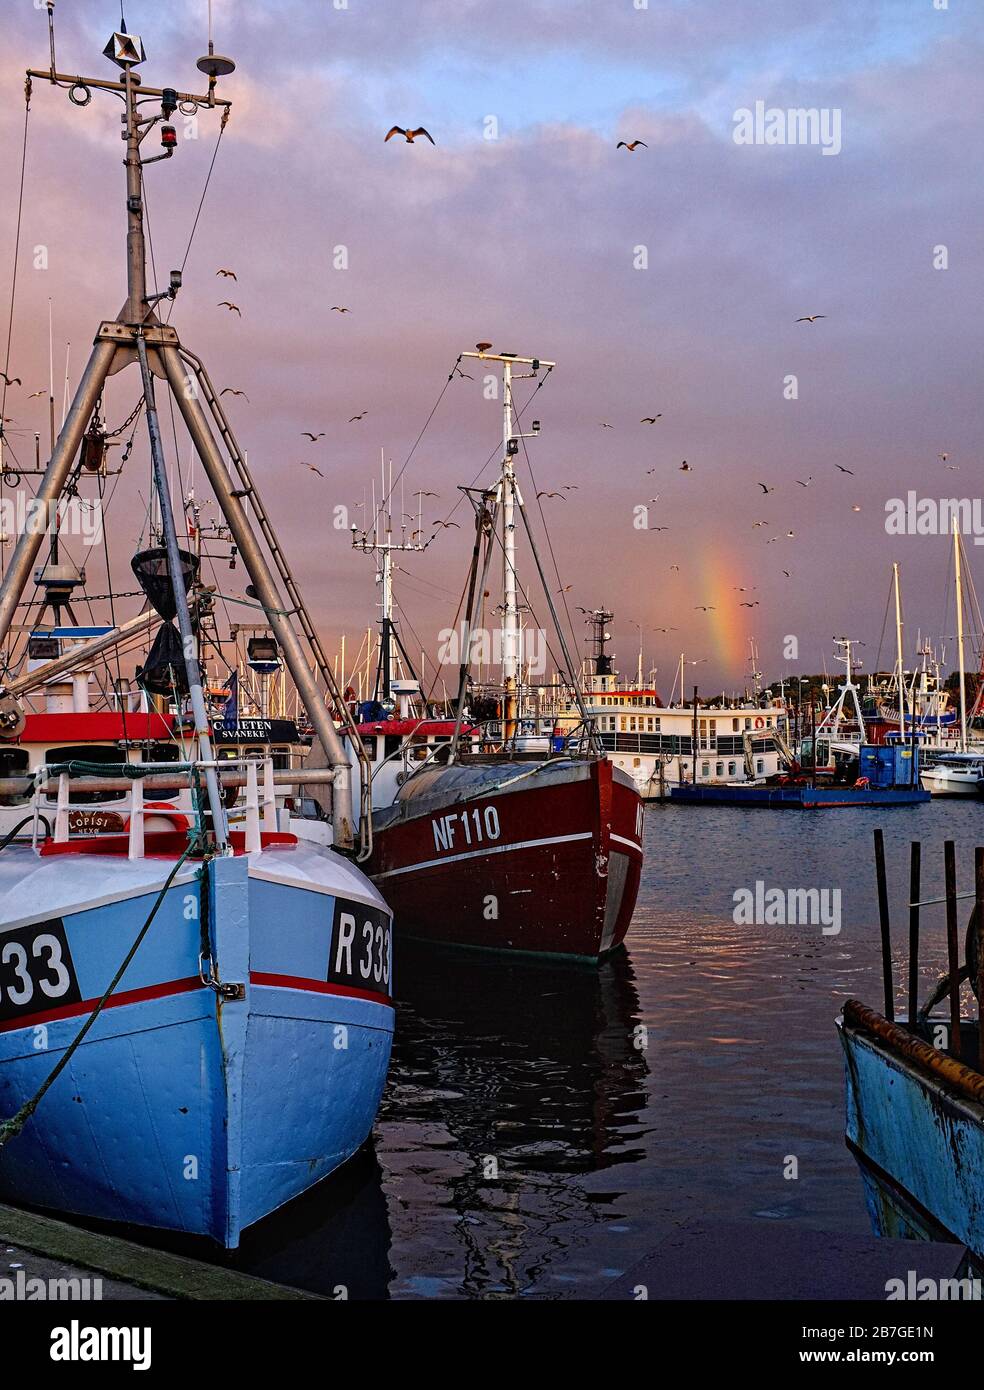 fishing wessels with rainbow Stock Photo